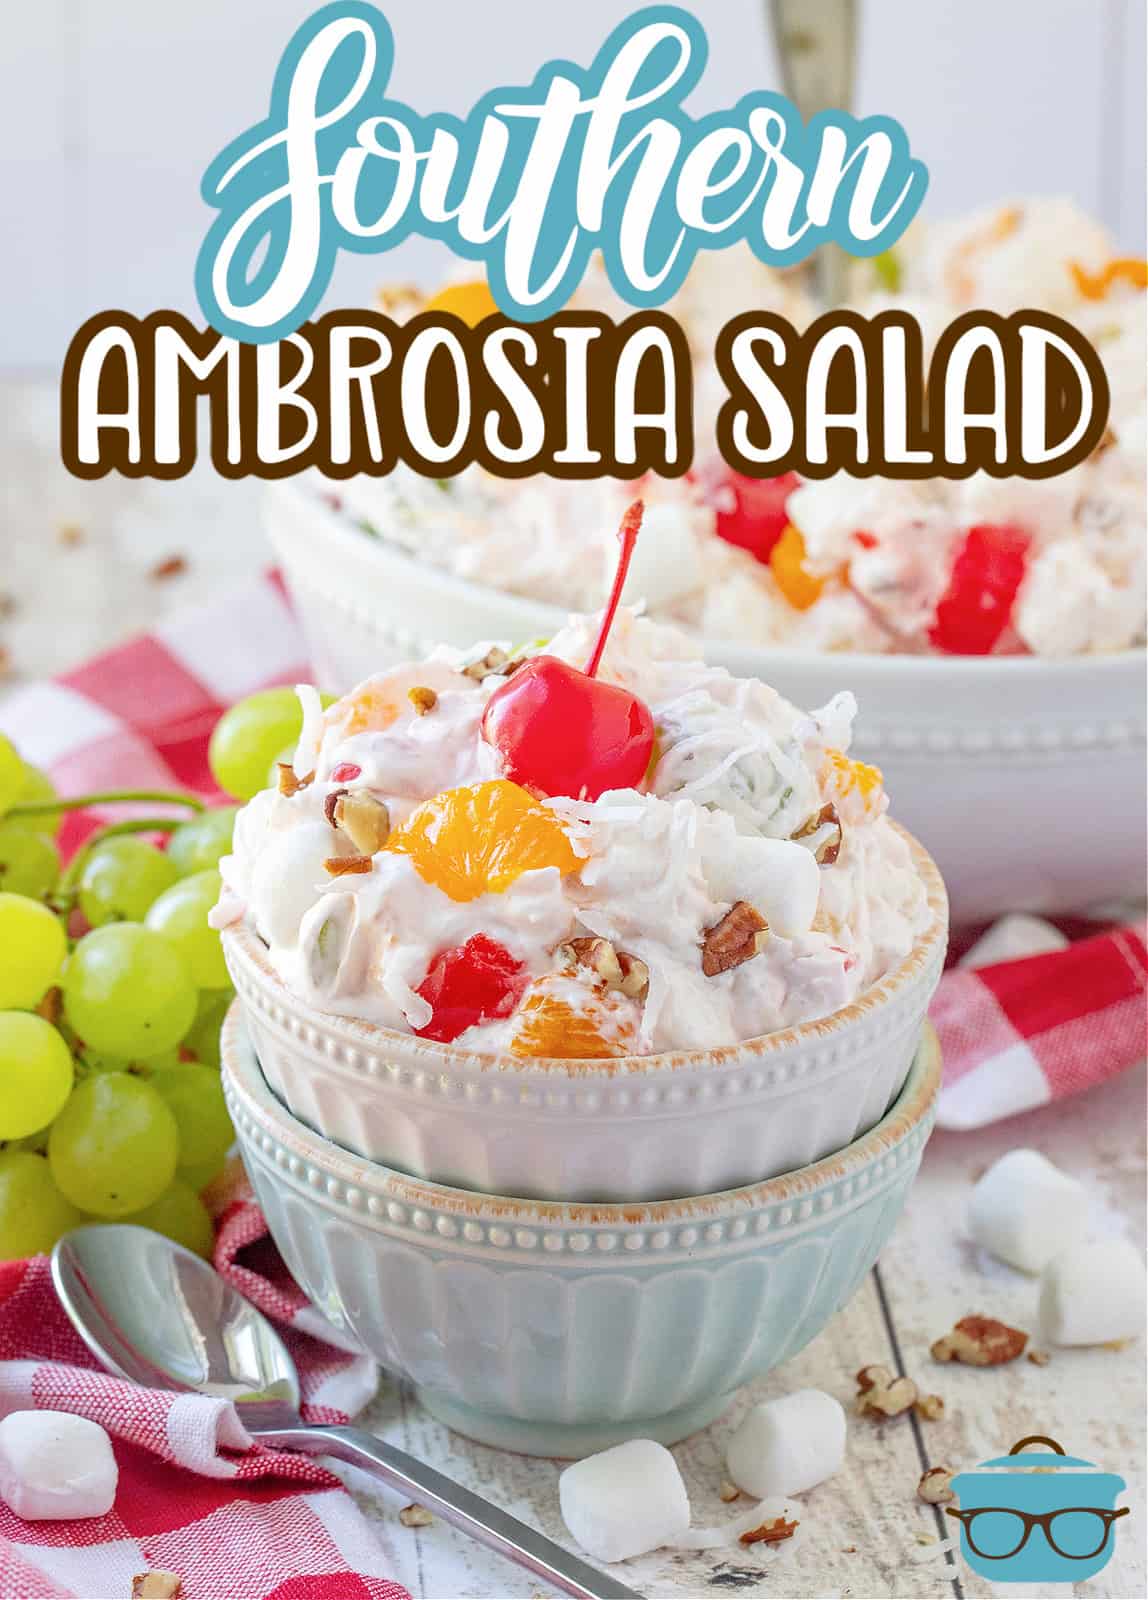 Southern Ambrosia Salad recipe from The Country Cook, a white and blue bowl stacked on top of each other, a serving of ambrosia salad shown in top bowl with a maraschino cherry on top and a bunch of green grapes in the background.